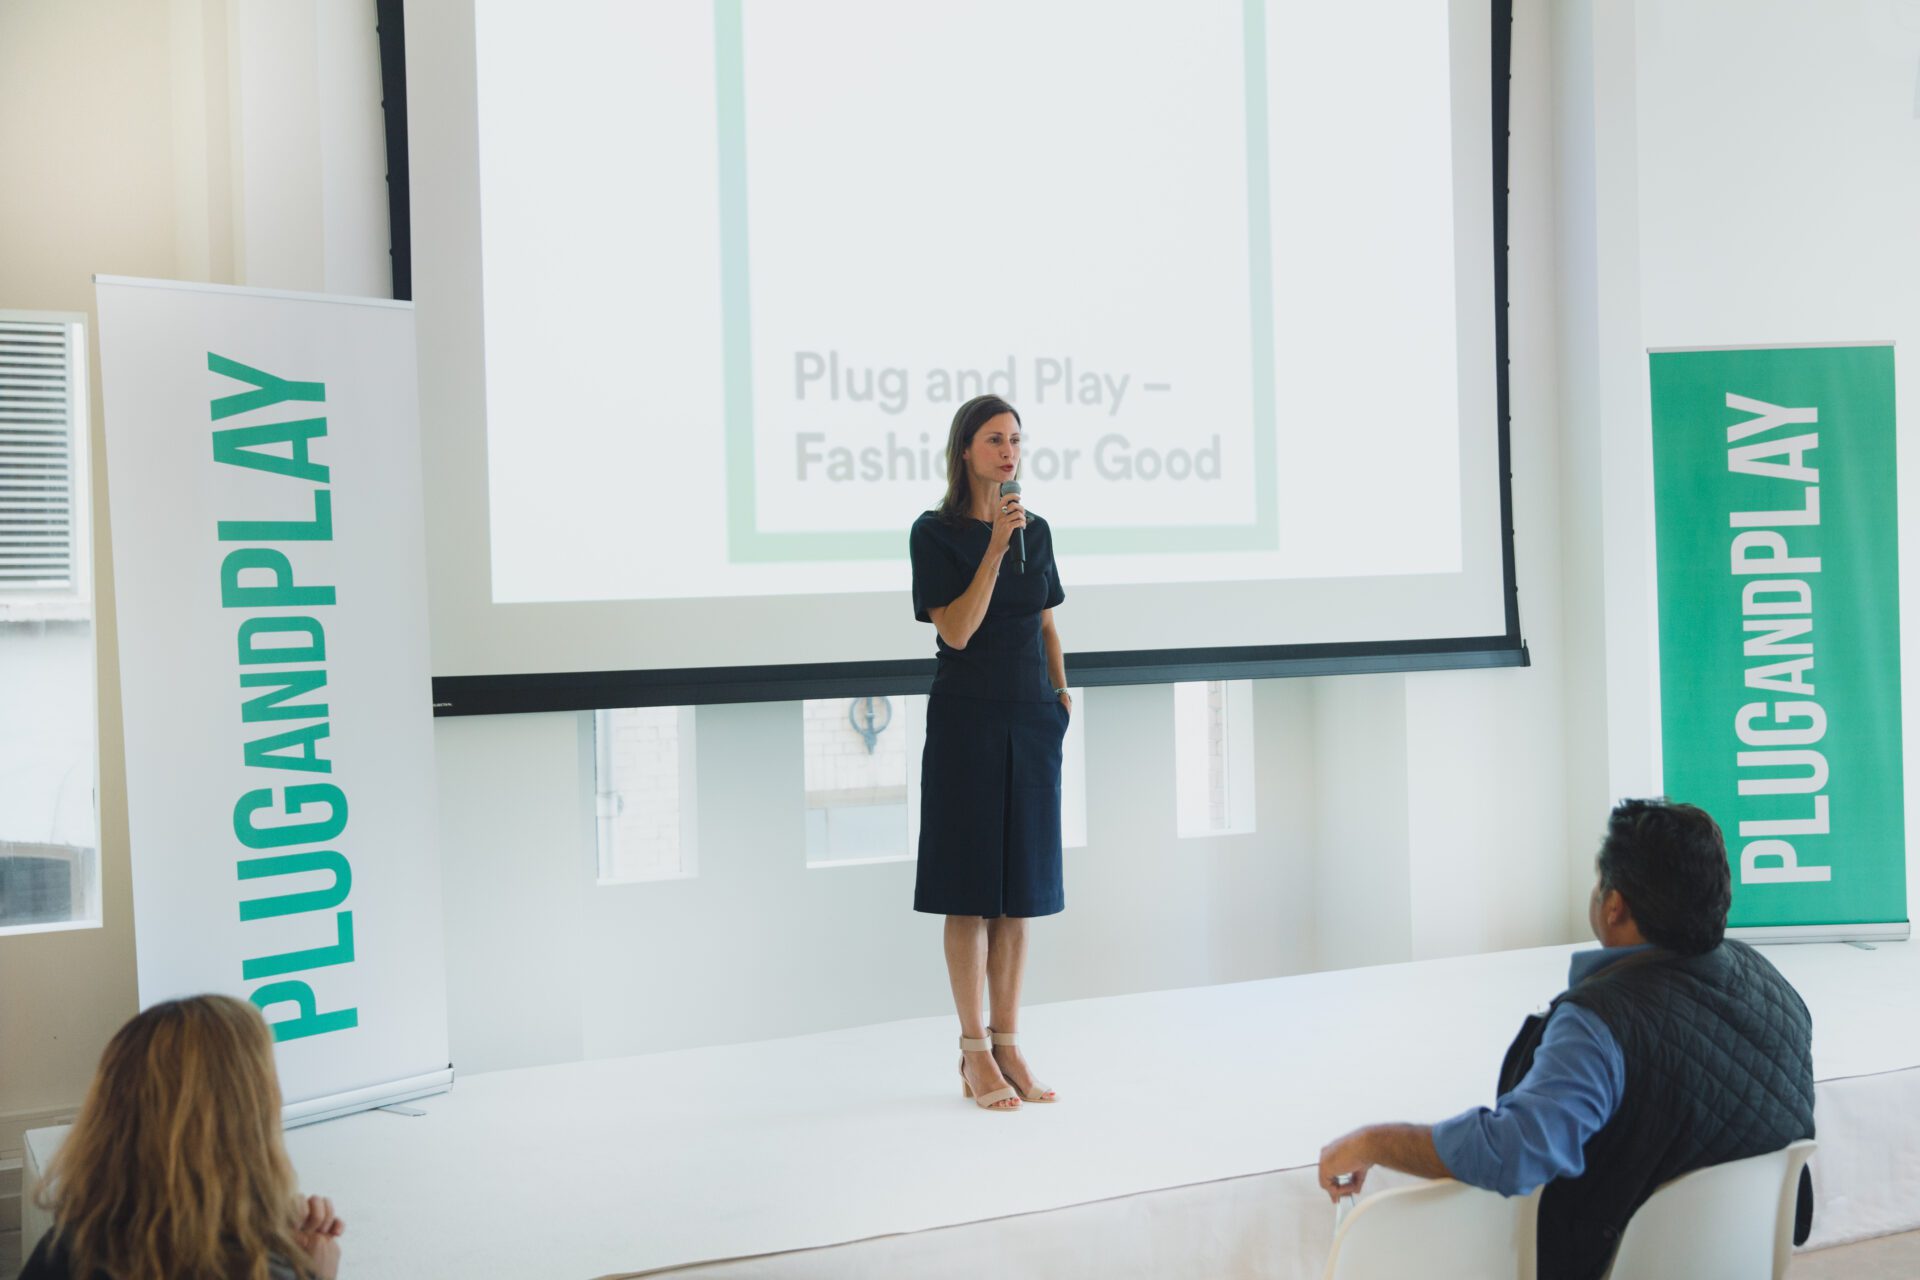 Plug and Play – Fashion for Good Accelerator Announces New Start-up Selection